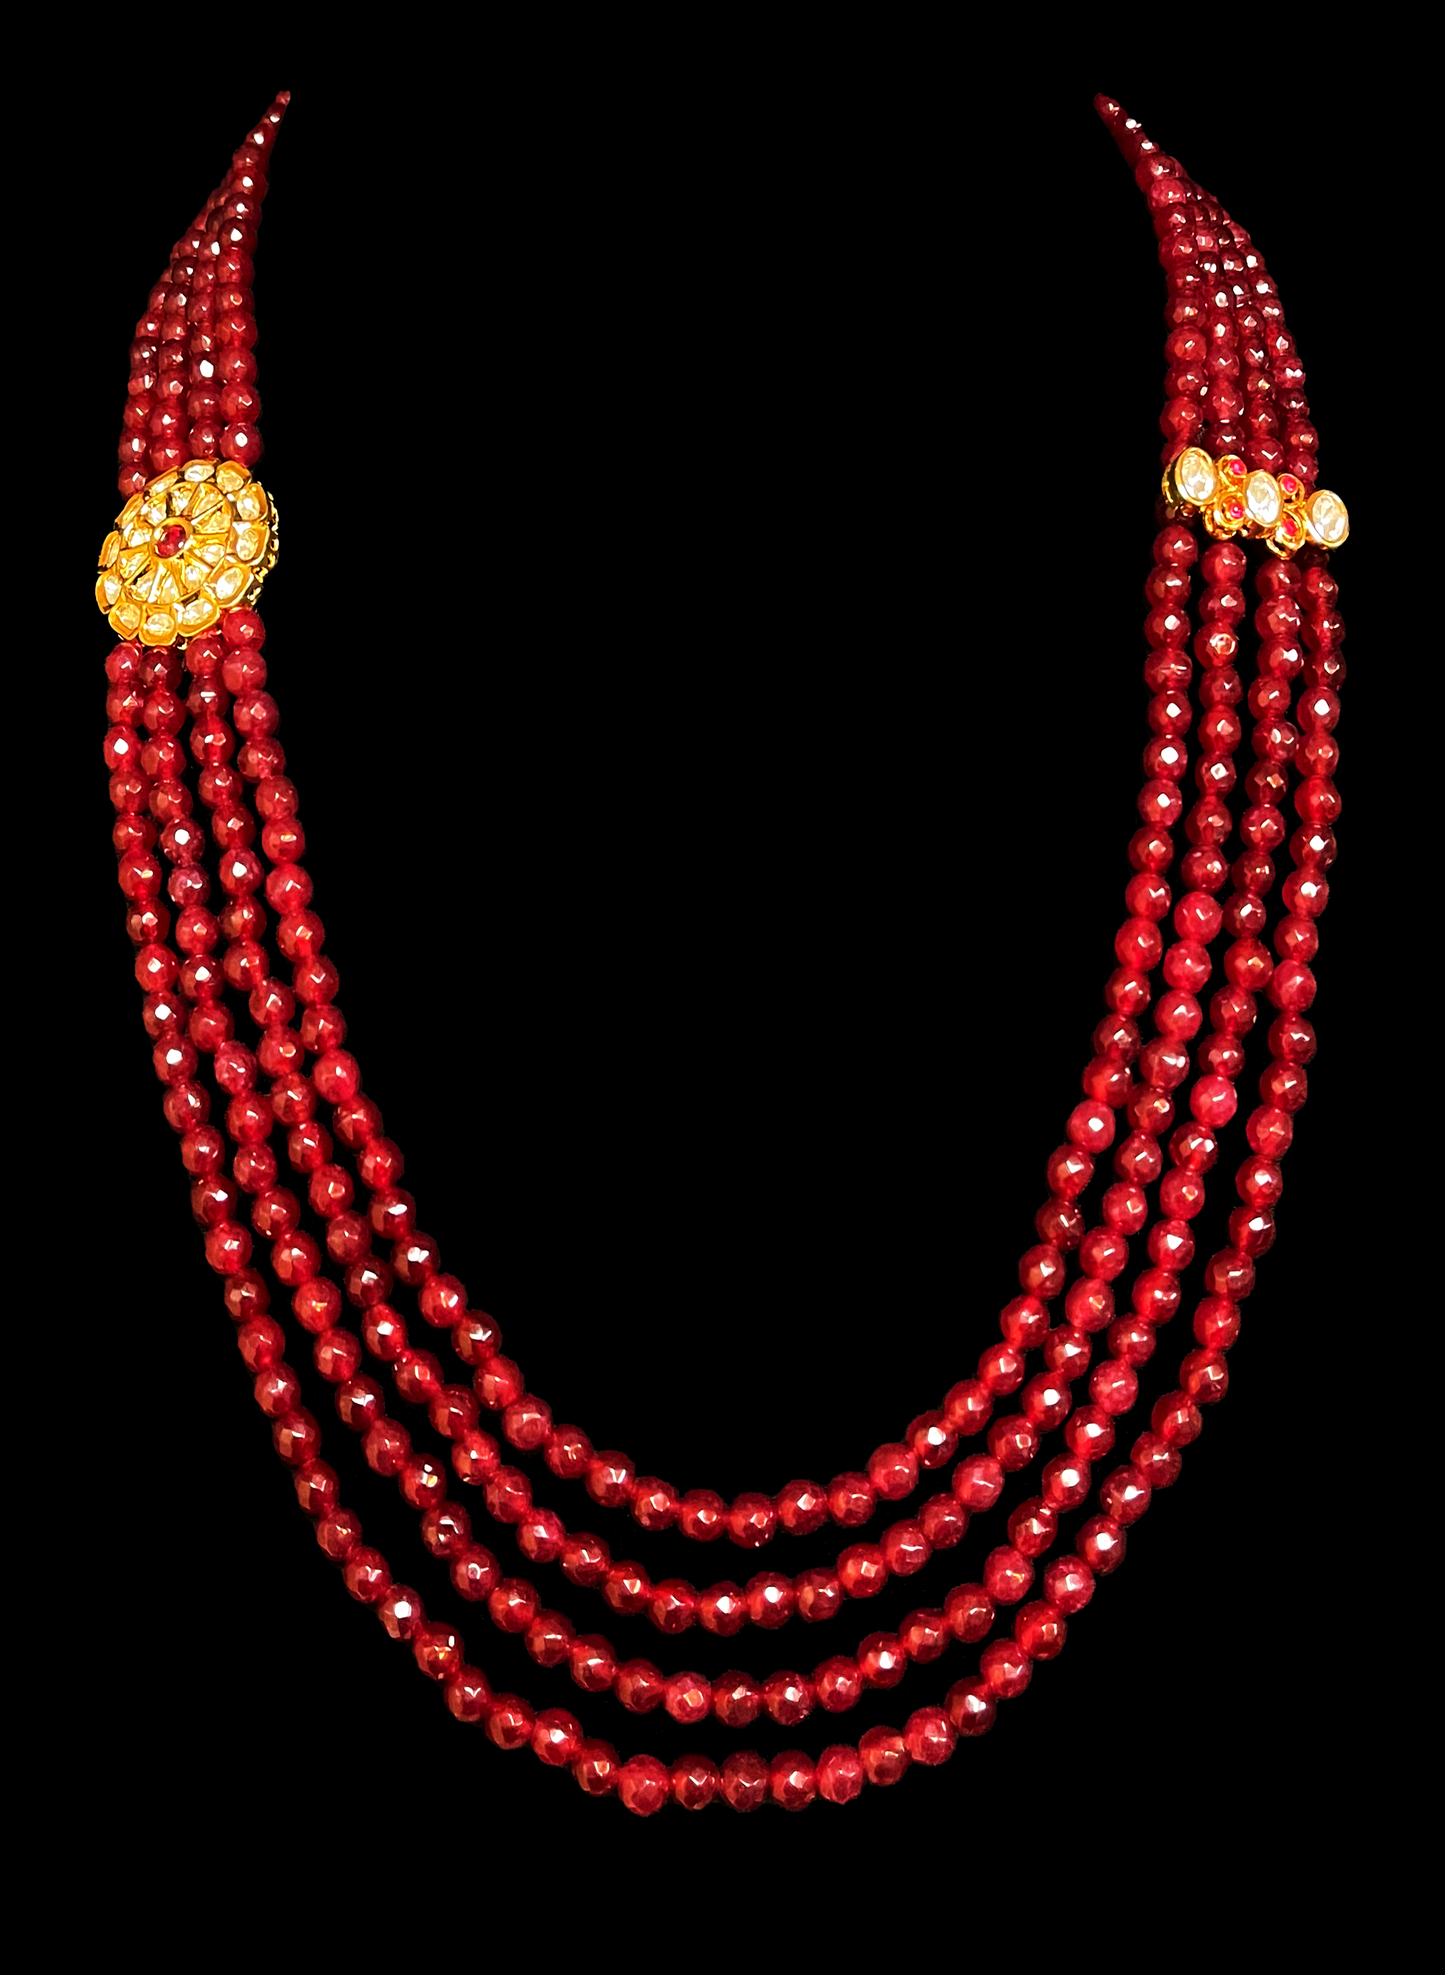 Men's bridal mala necklace - Grooms red Multilayer jewelry